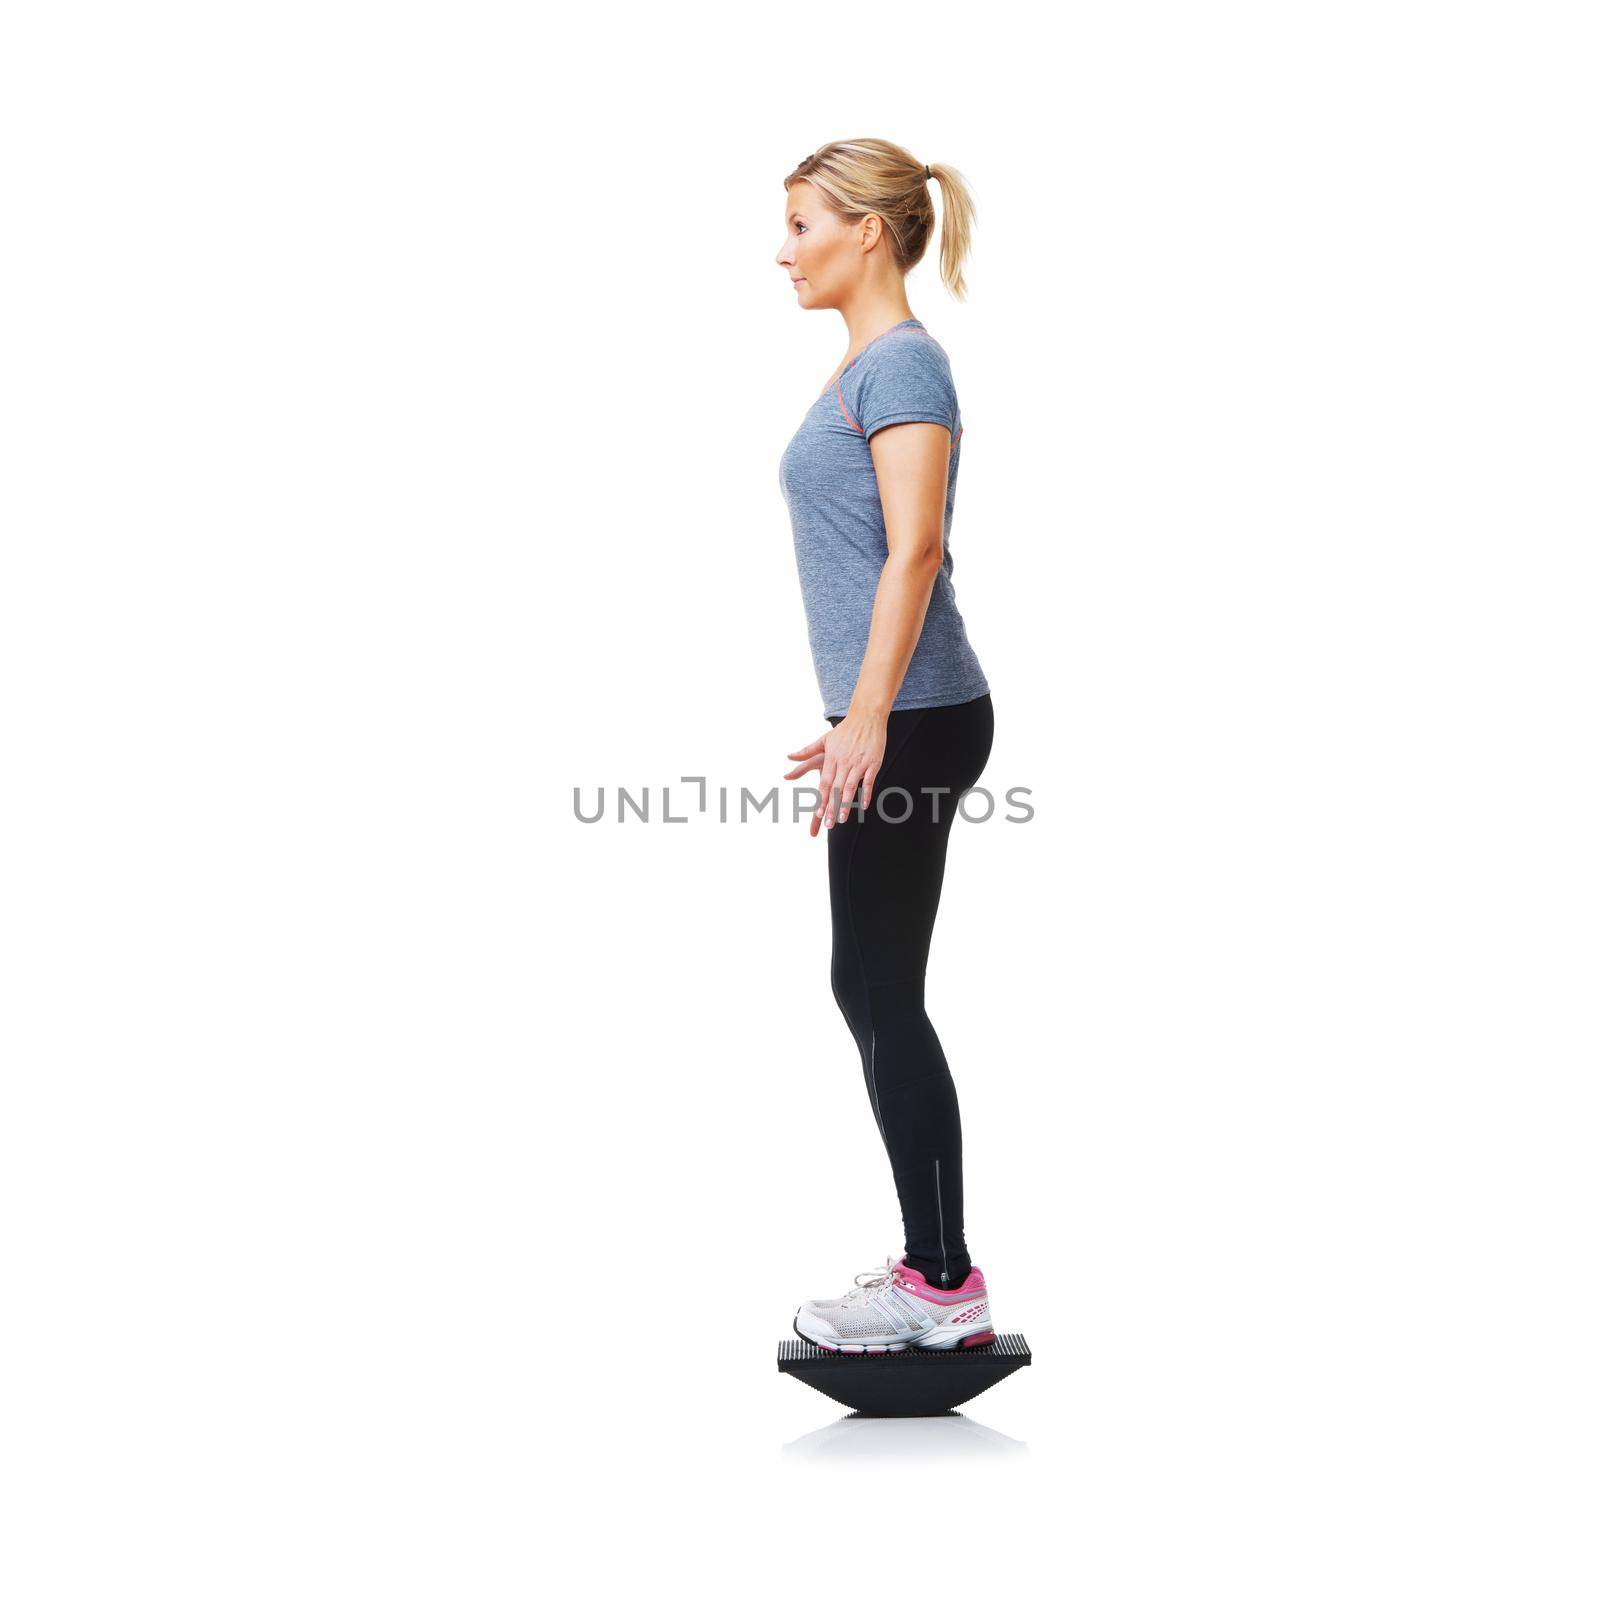 Balancing on her bosu - Health Fitness. A pretty young blond standing on a balance board while isolated on white. by YuriArcurs